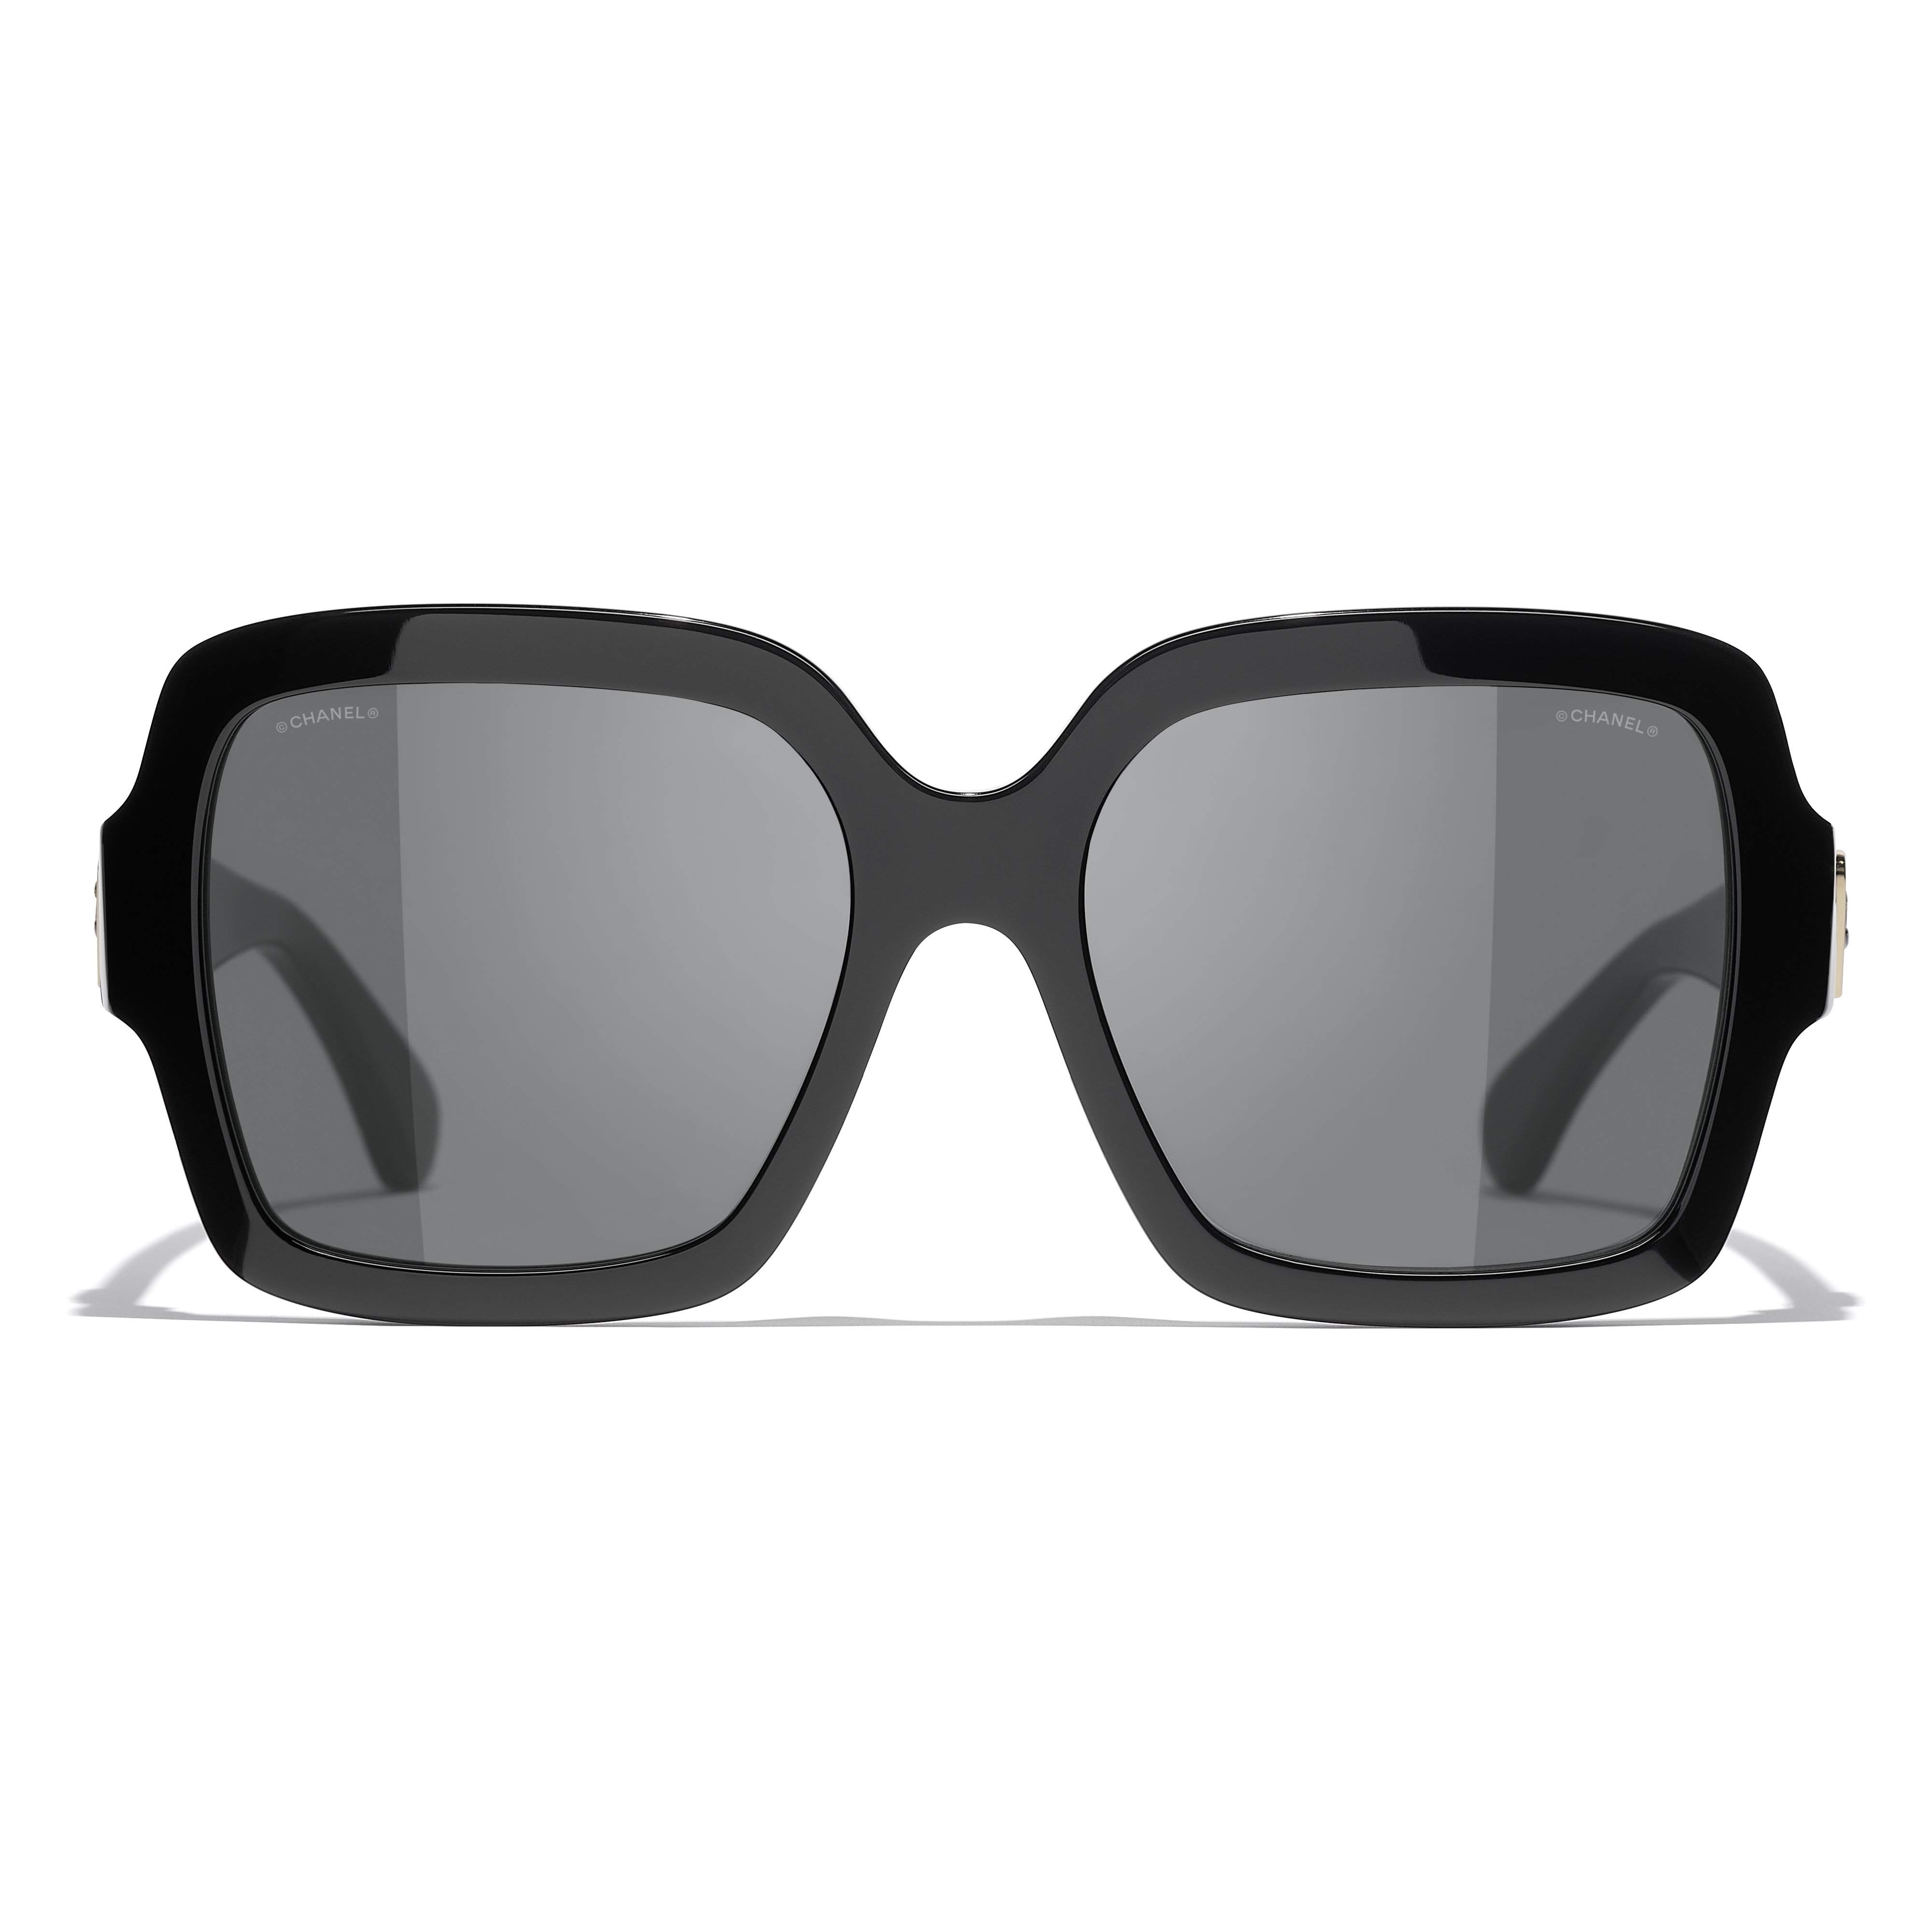 Sunglasses CHANEL CH5494 C888S4 53-18 Black in stock | Price 258,33 € |  Visiofactory